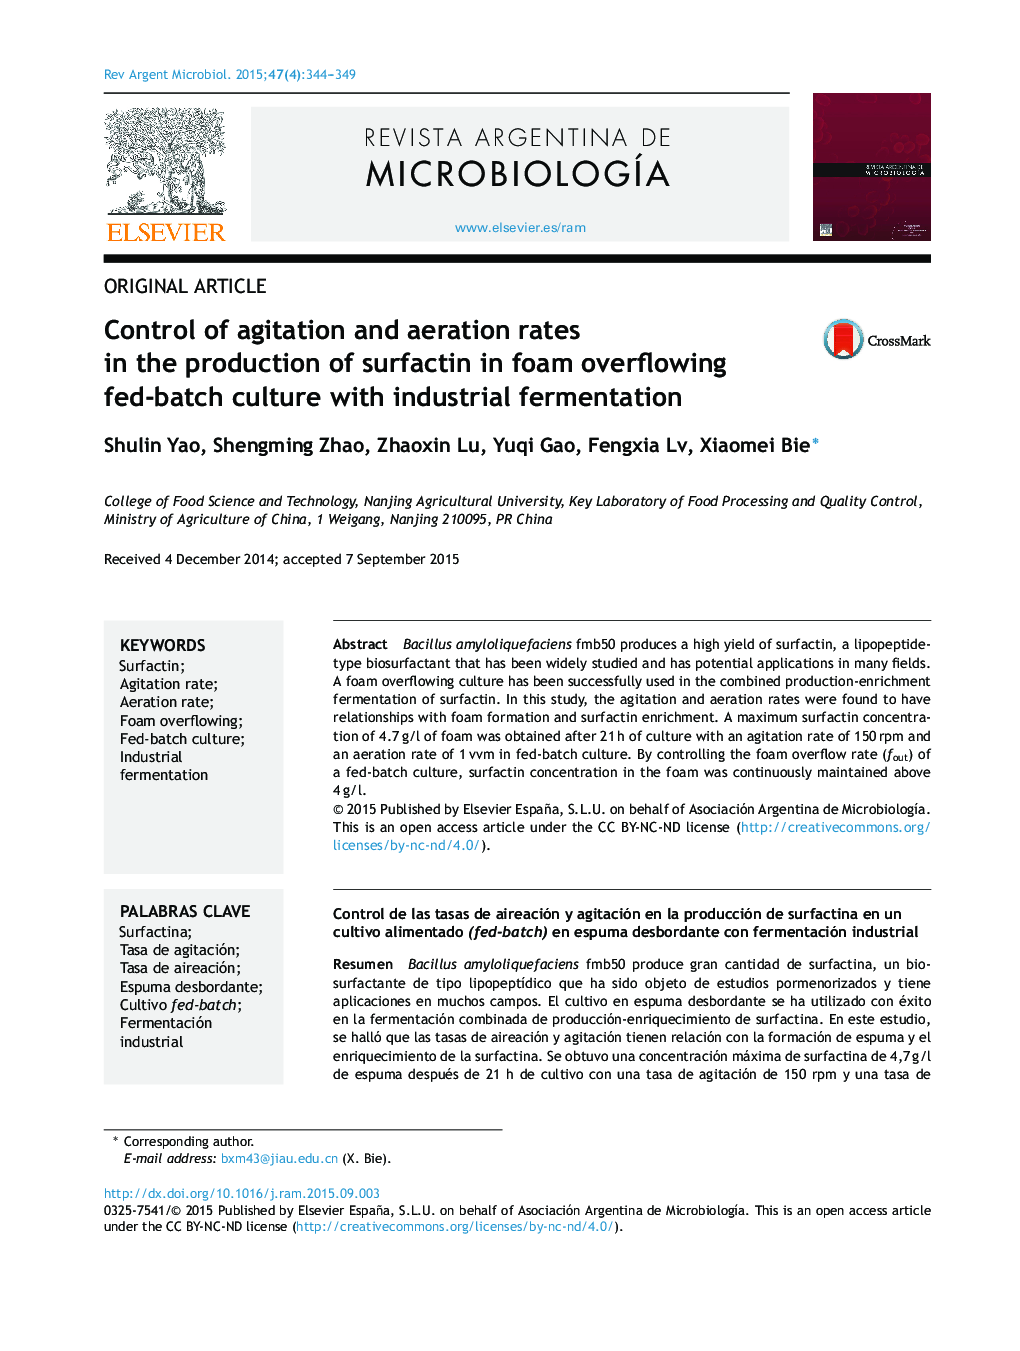 Control of agitation and aeration rates in the production of surfactin in foam overflowing fed-batch culture with industrial fermentation